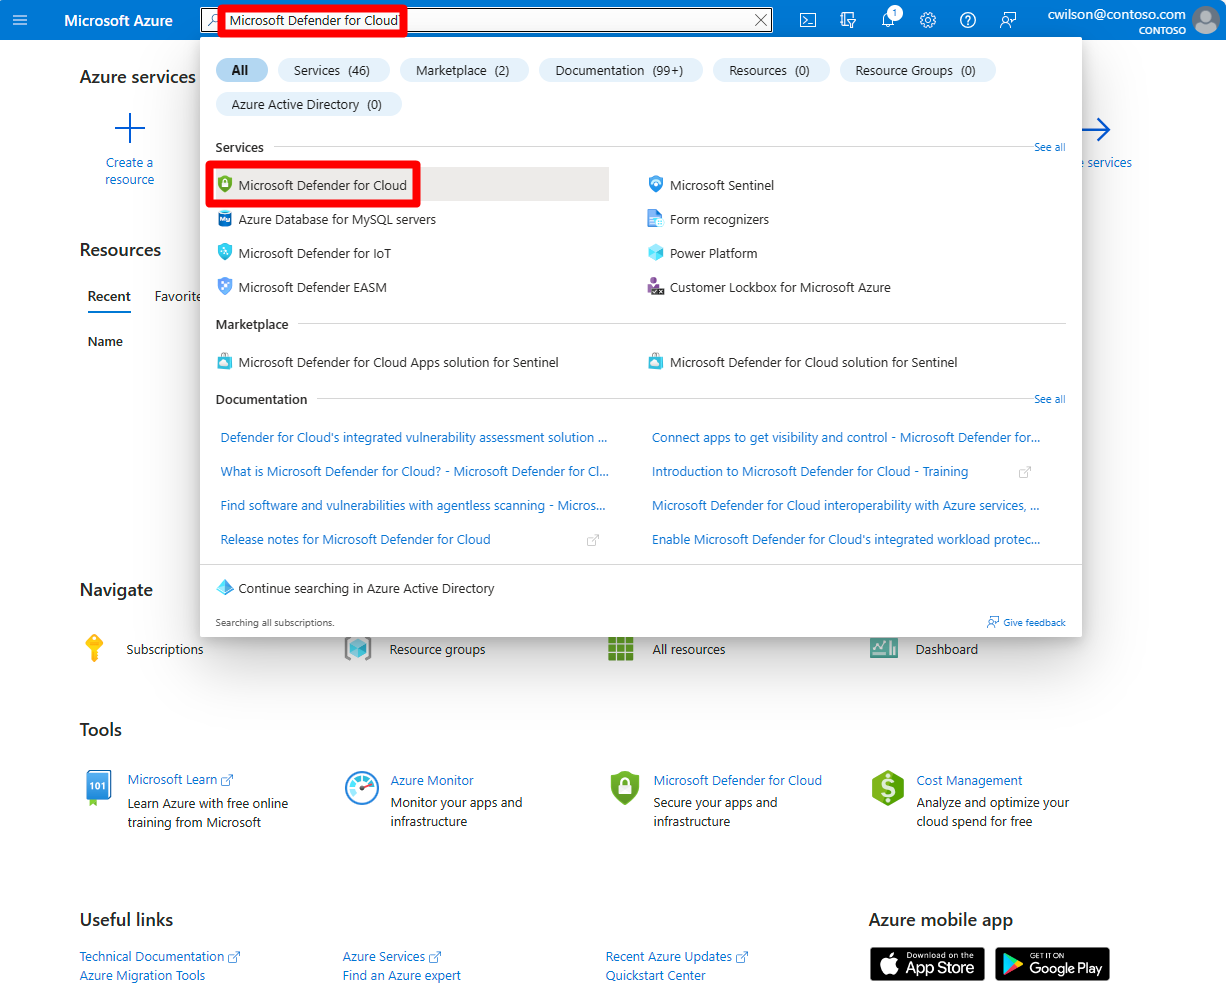 Screenshot of the Azure portal with Microsoft Defender for Cloud entered in the search bar and highlighted in the drop down menu.